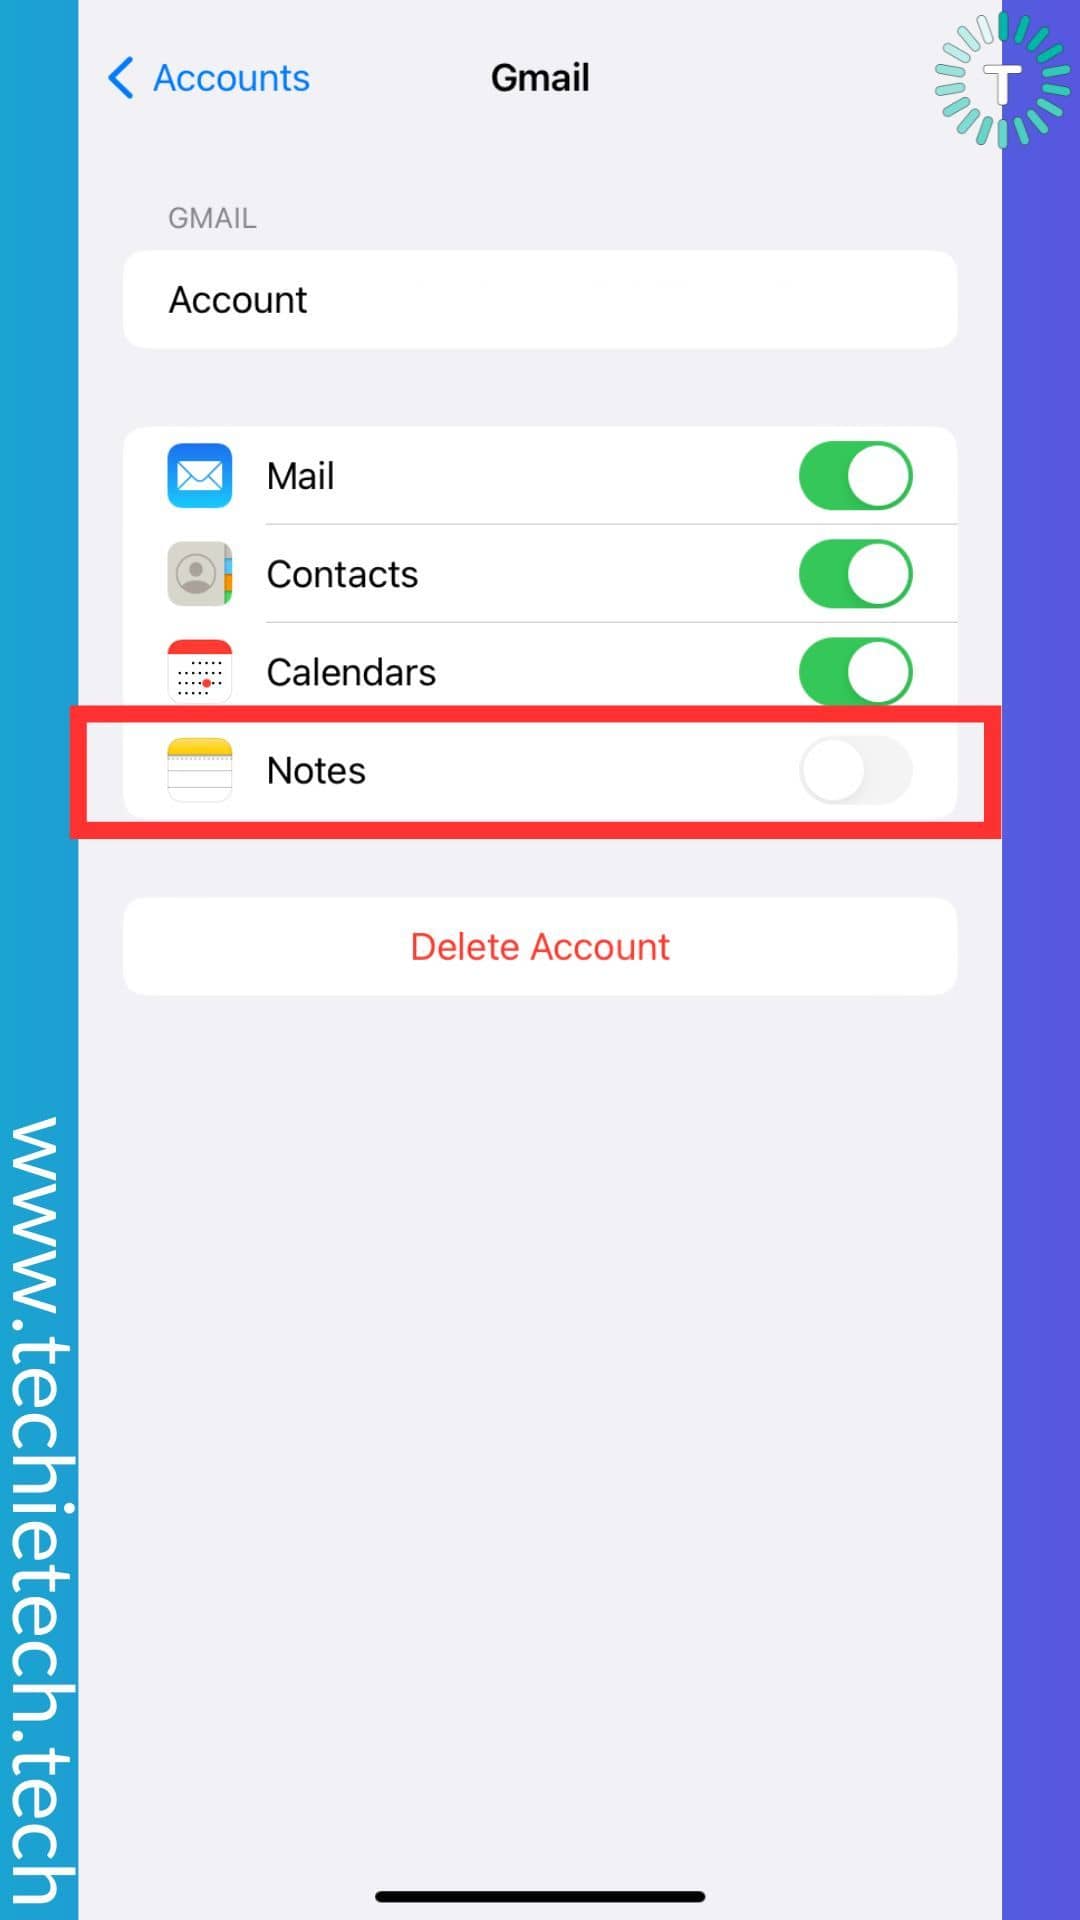 uncheck or turn off Notes from the following screen